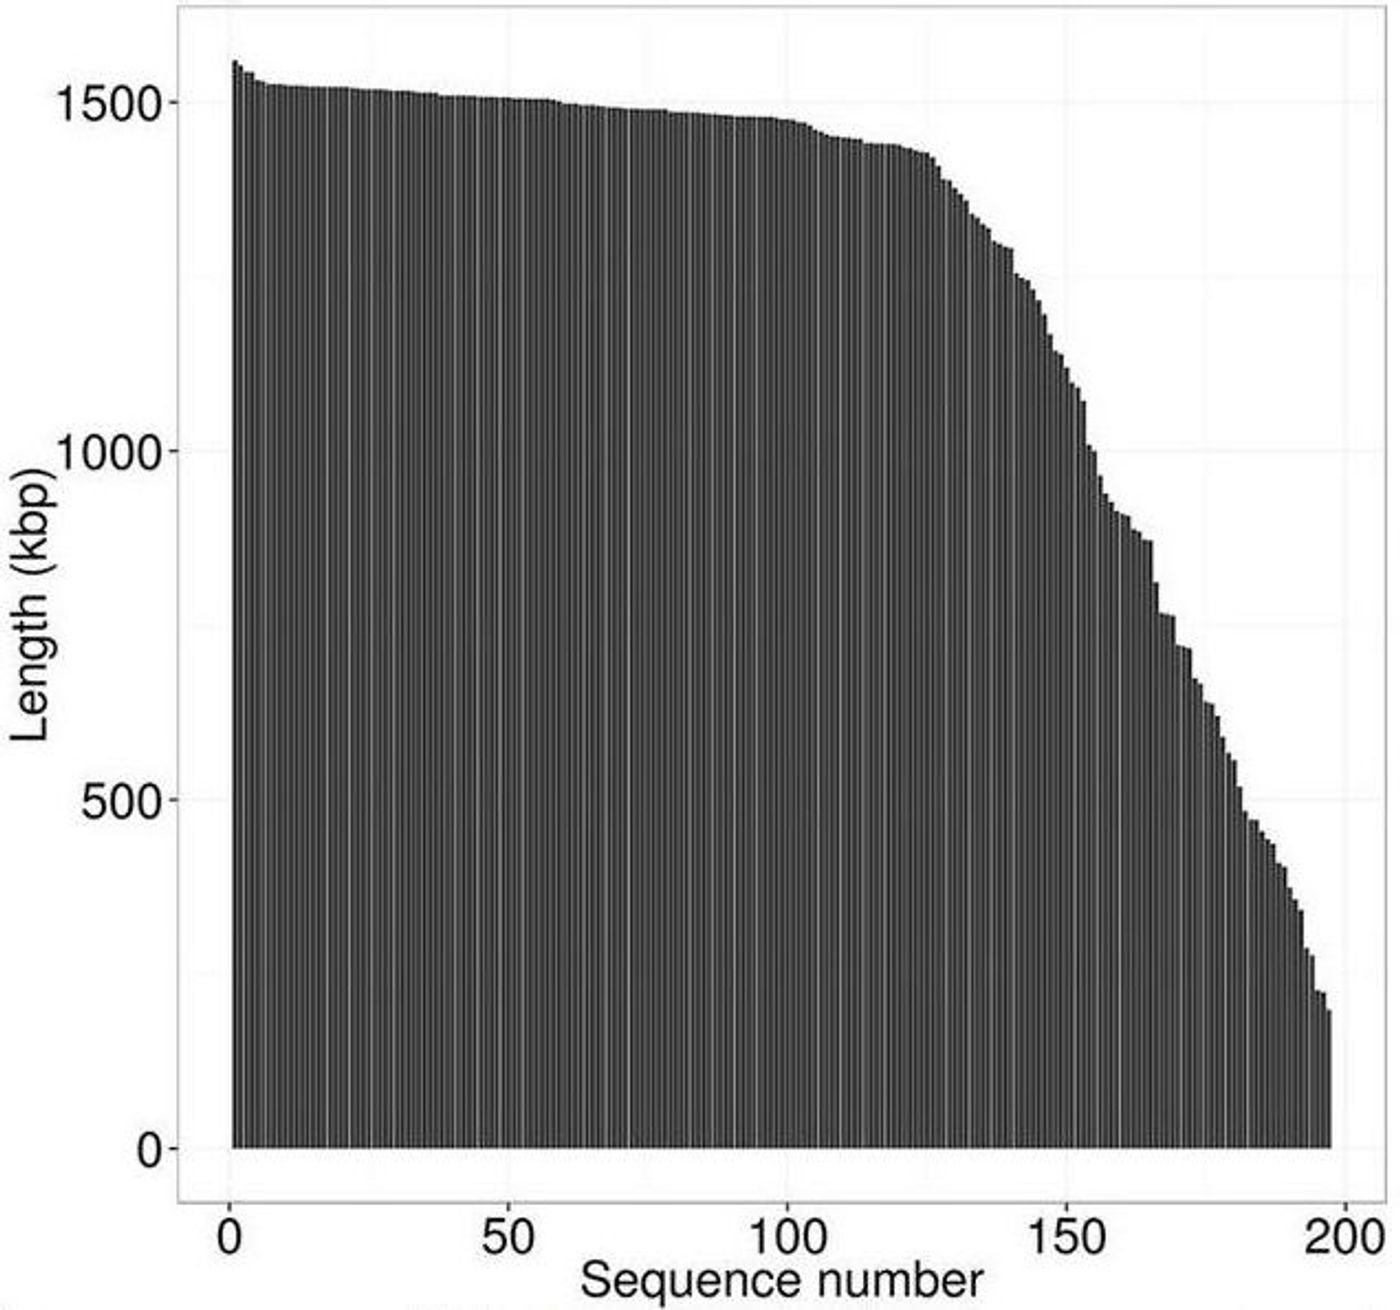 16S rRNA gene length distribution from Moleculo-only contigs. / Credit: mSystems White et al